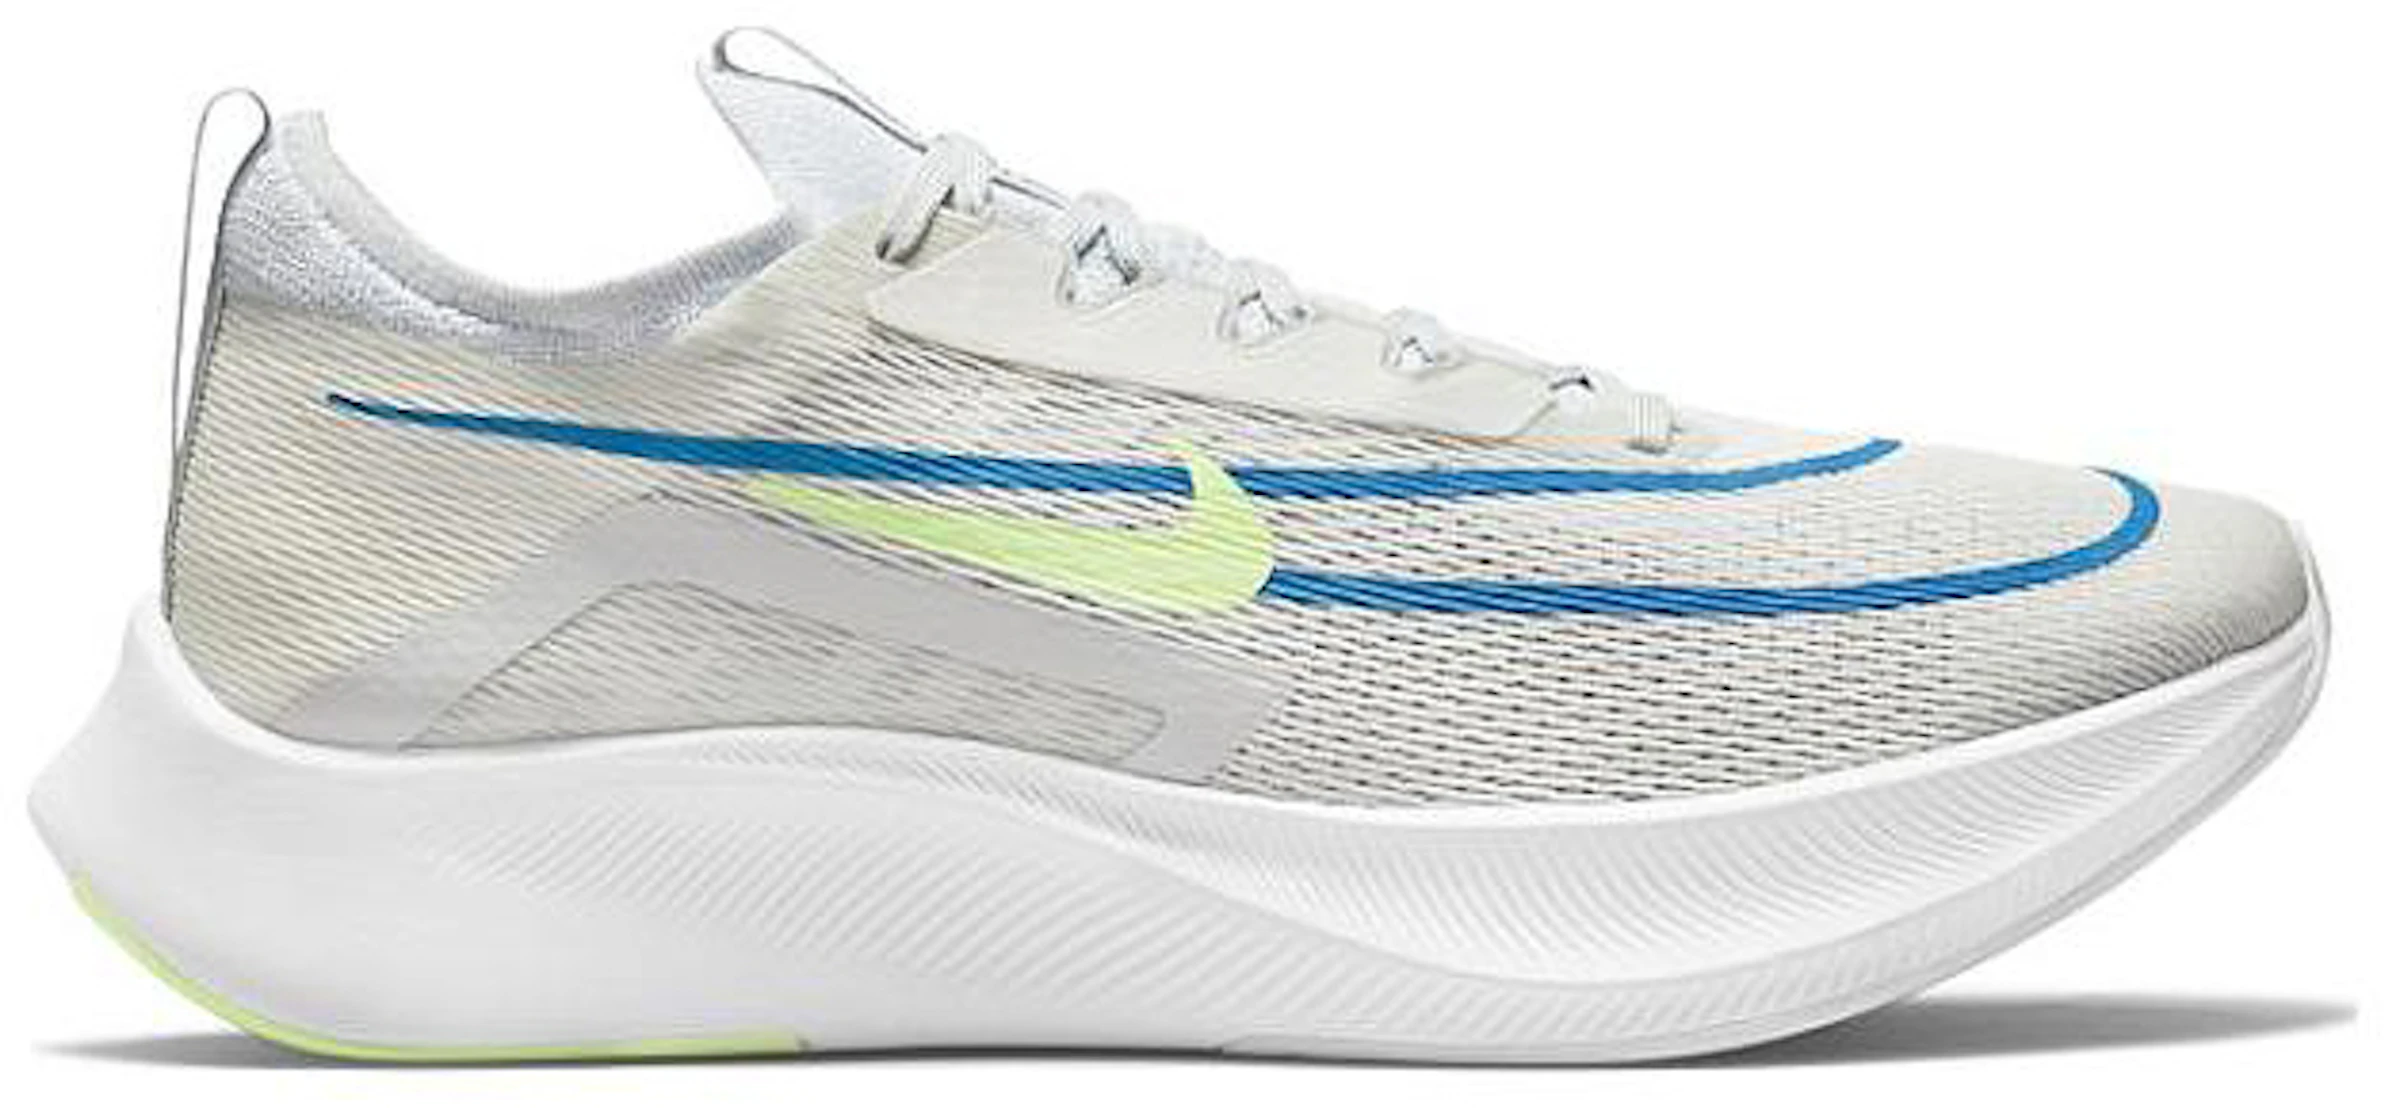 Nike Zoom Fly 4 White Blue Lime - CT2392-100 -